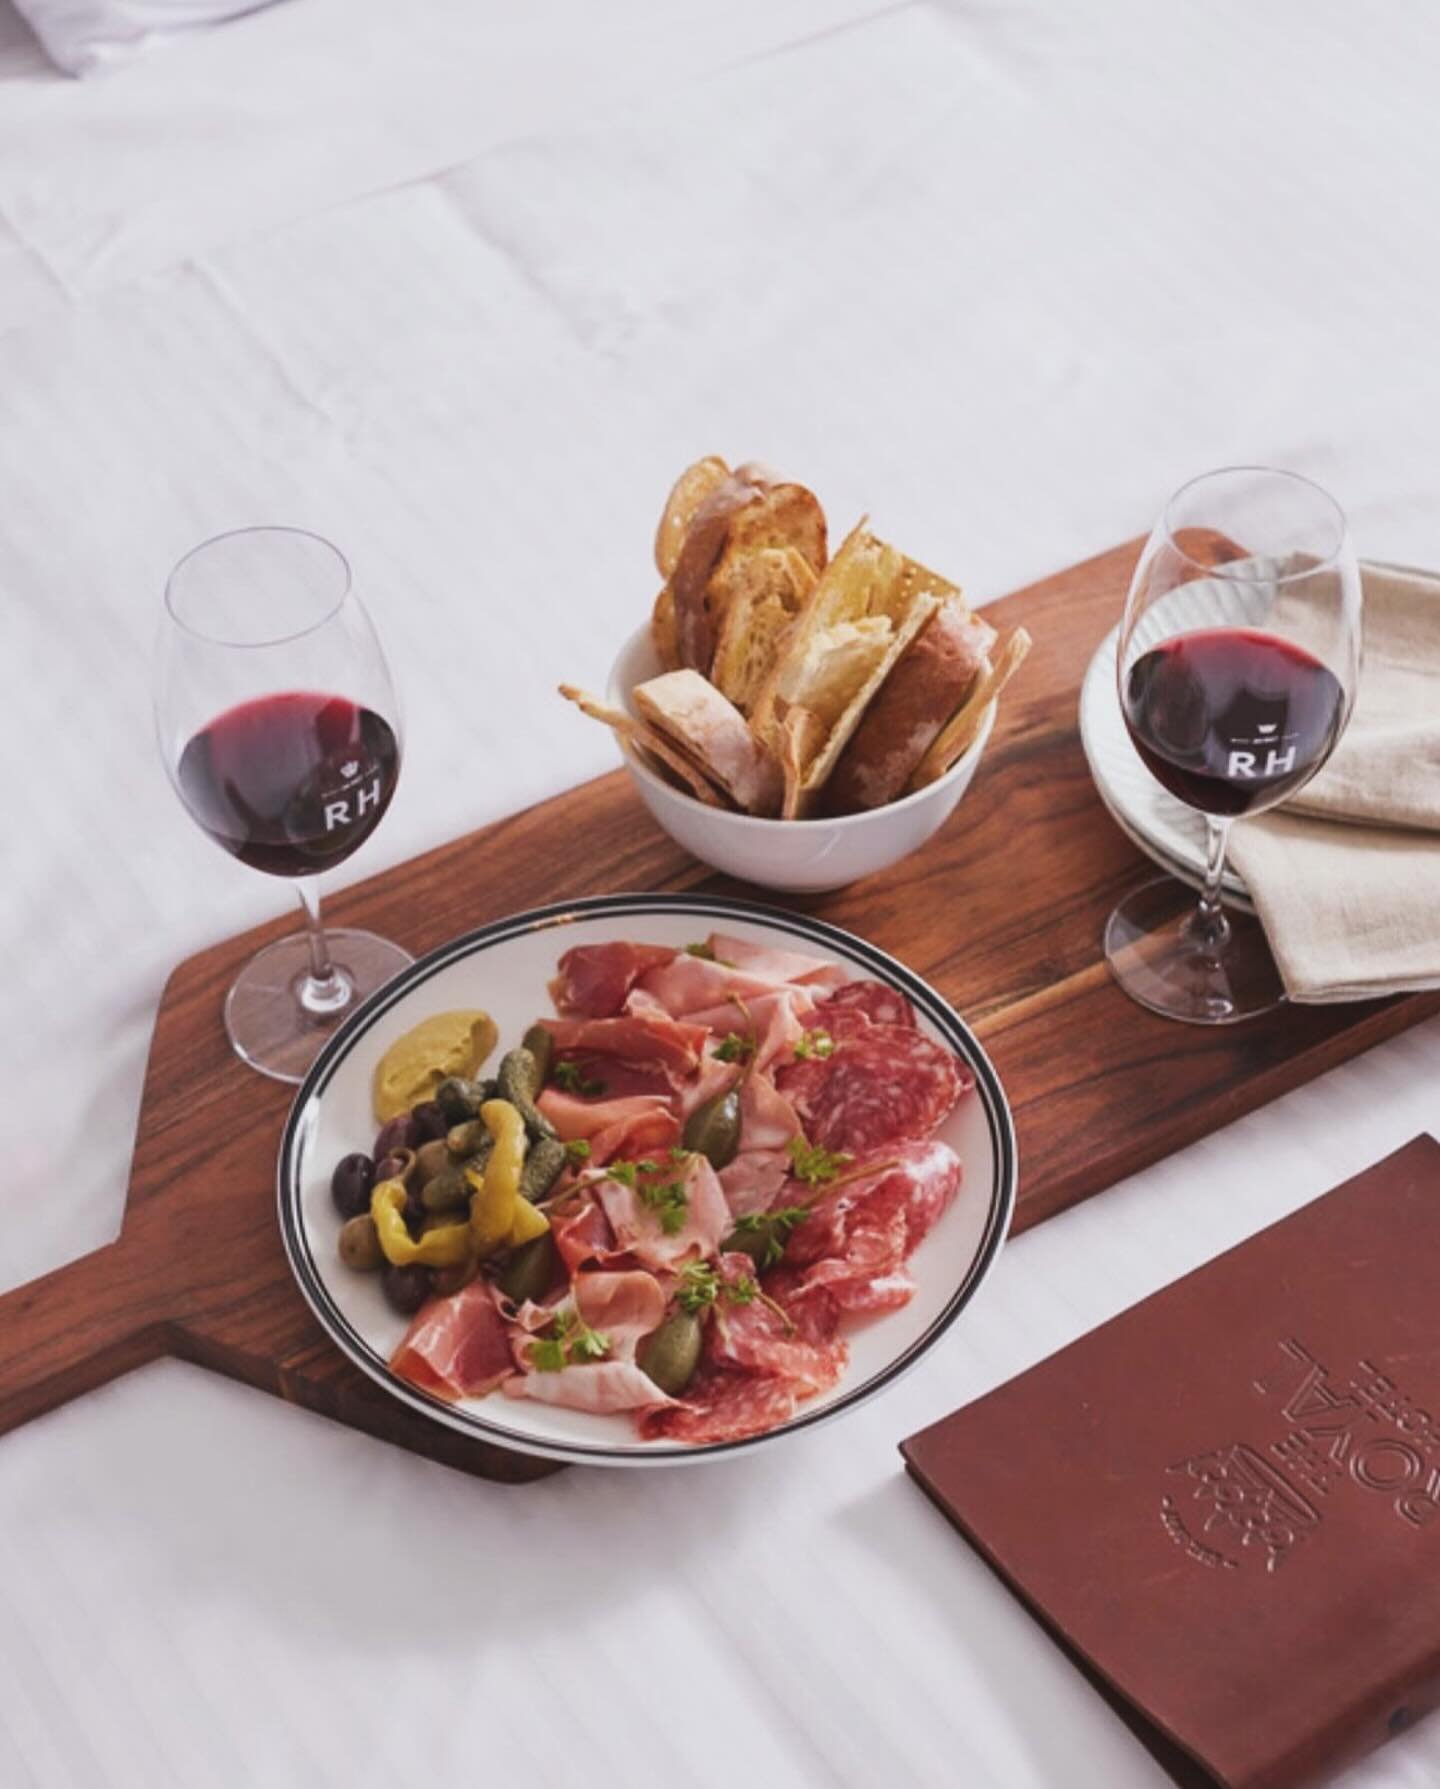 Indulge Mum this Mother&rsquo;s Day with a weekend getaway! For a limited time only, treat her to a delightful charcuterie board paired with a chilled bottle of Prosecco right in the comfort of your room, all for just $89. 

Simply add on when bookin